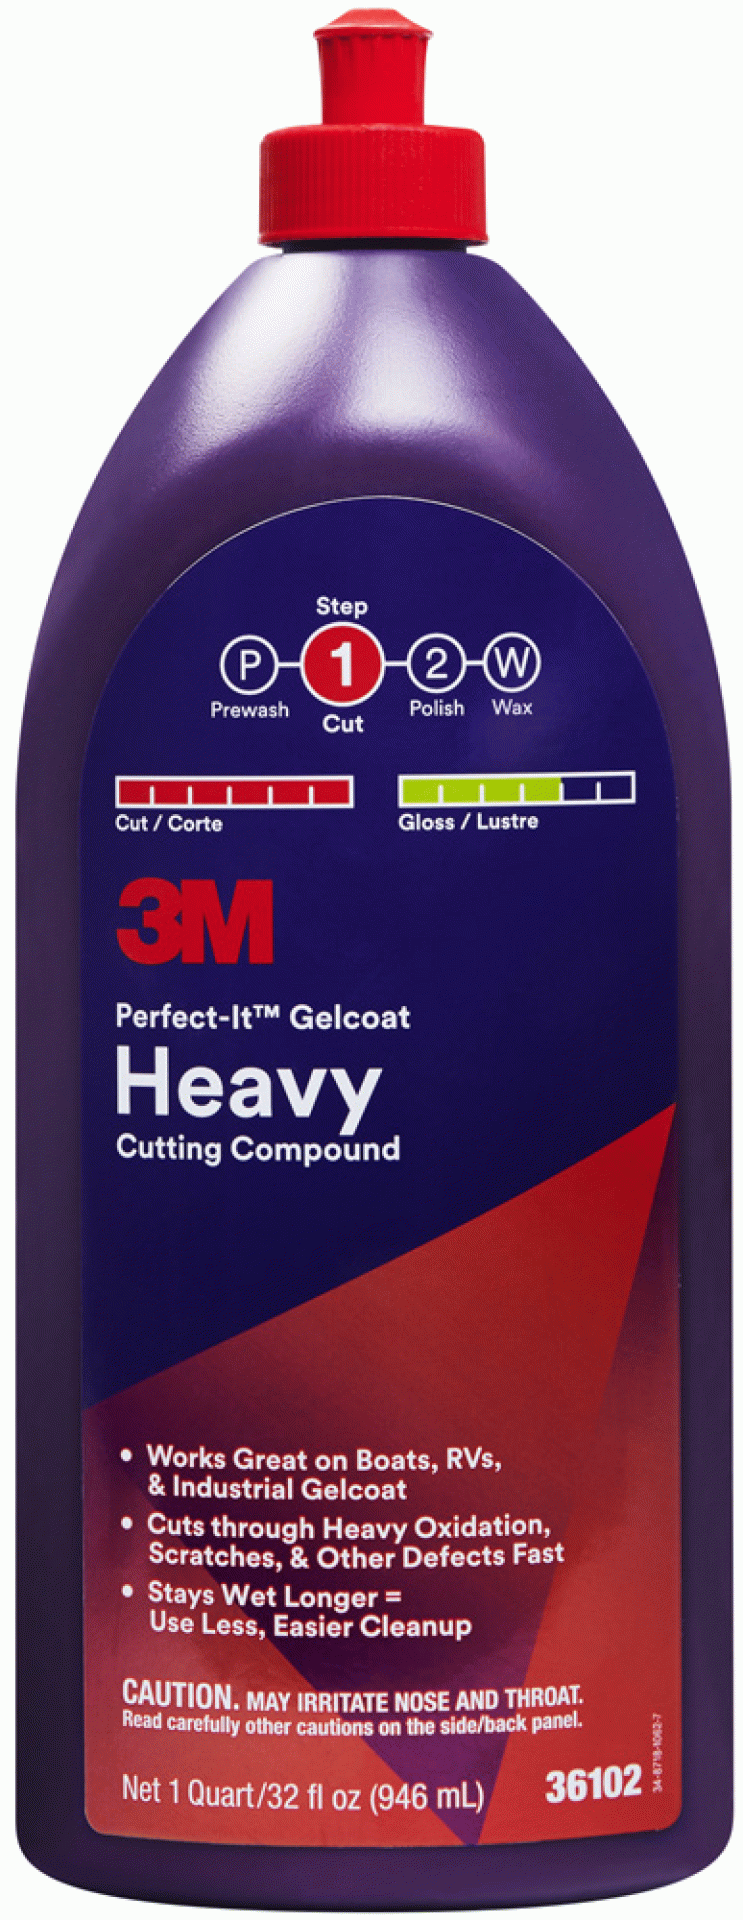 3M Company | 36102 | Perfect-It GelCoat Heavy Cutting Compound - 32 Oz.